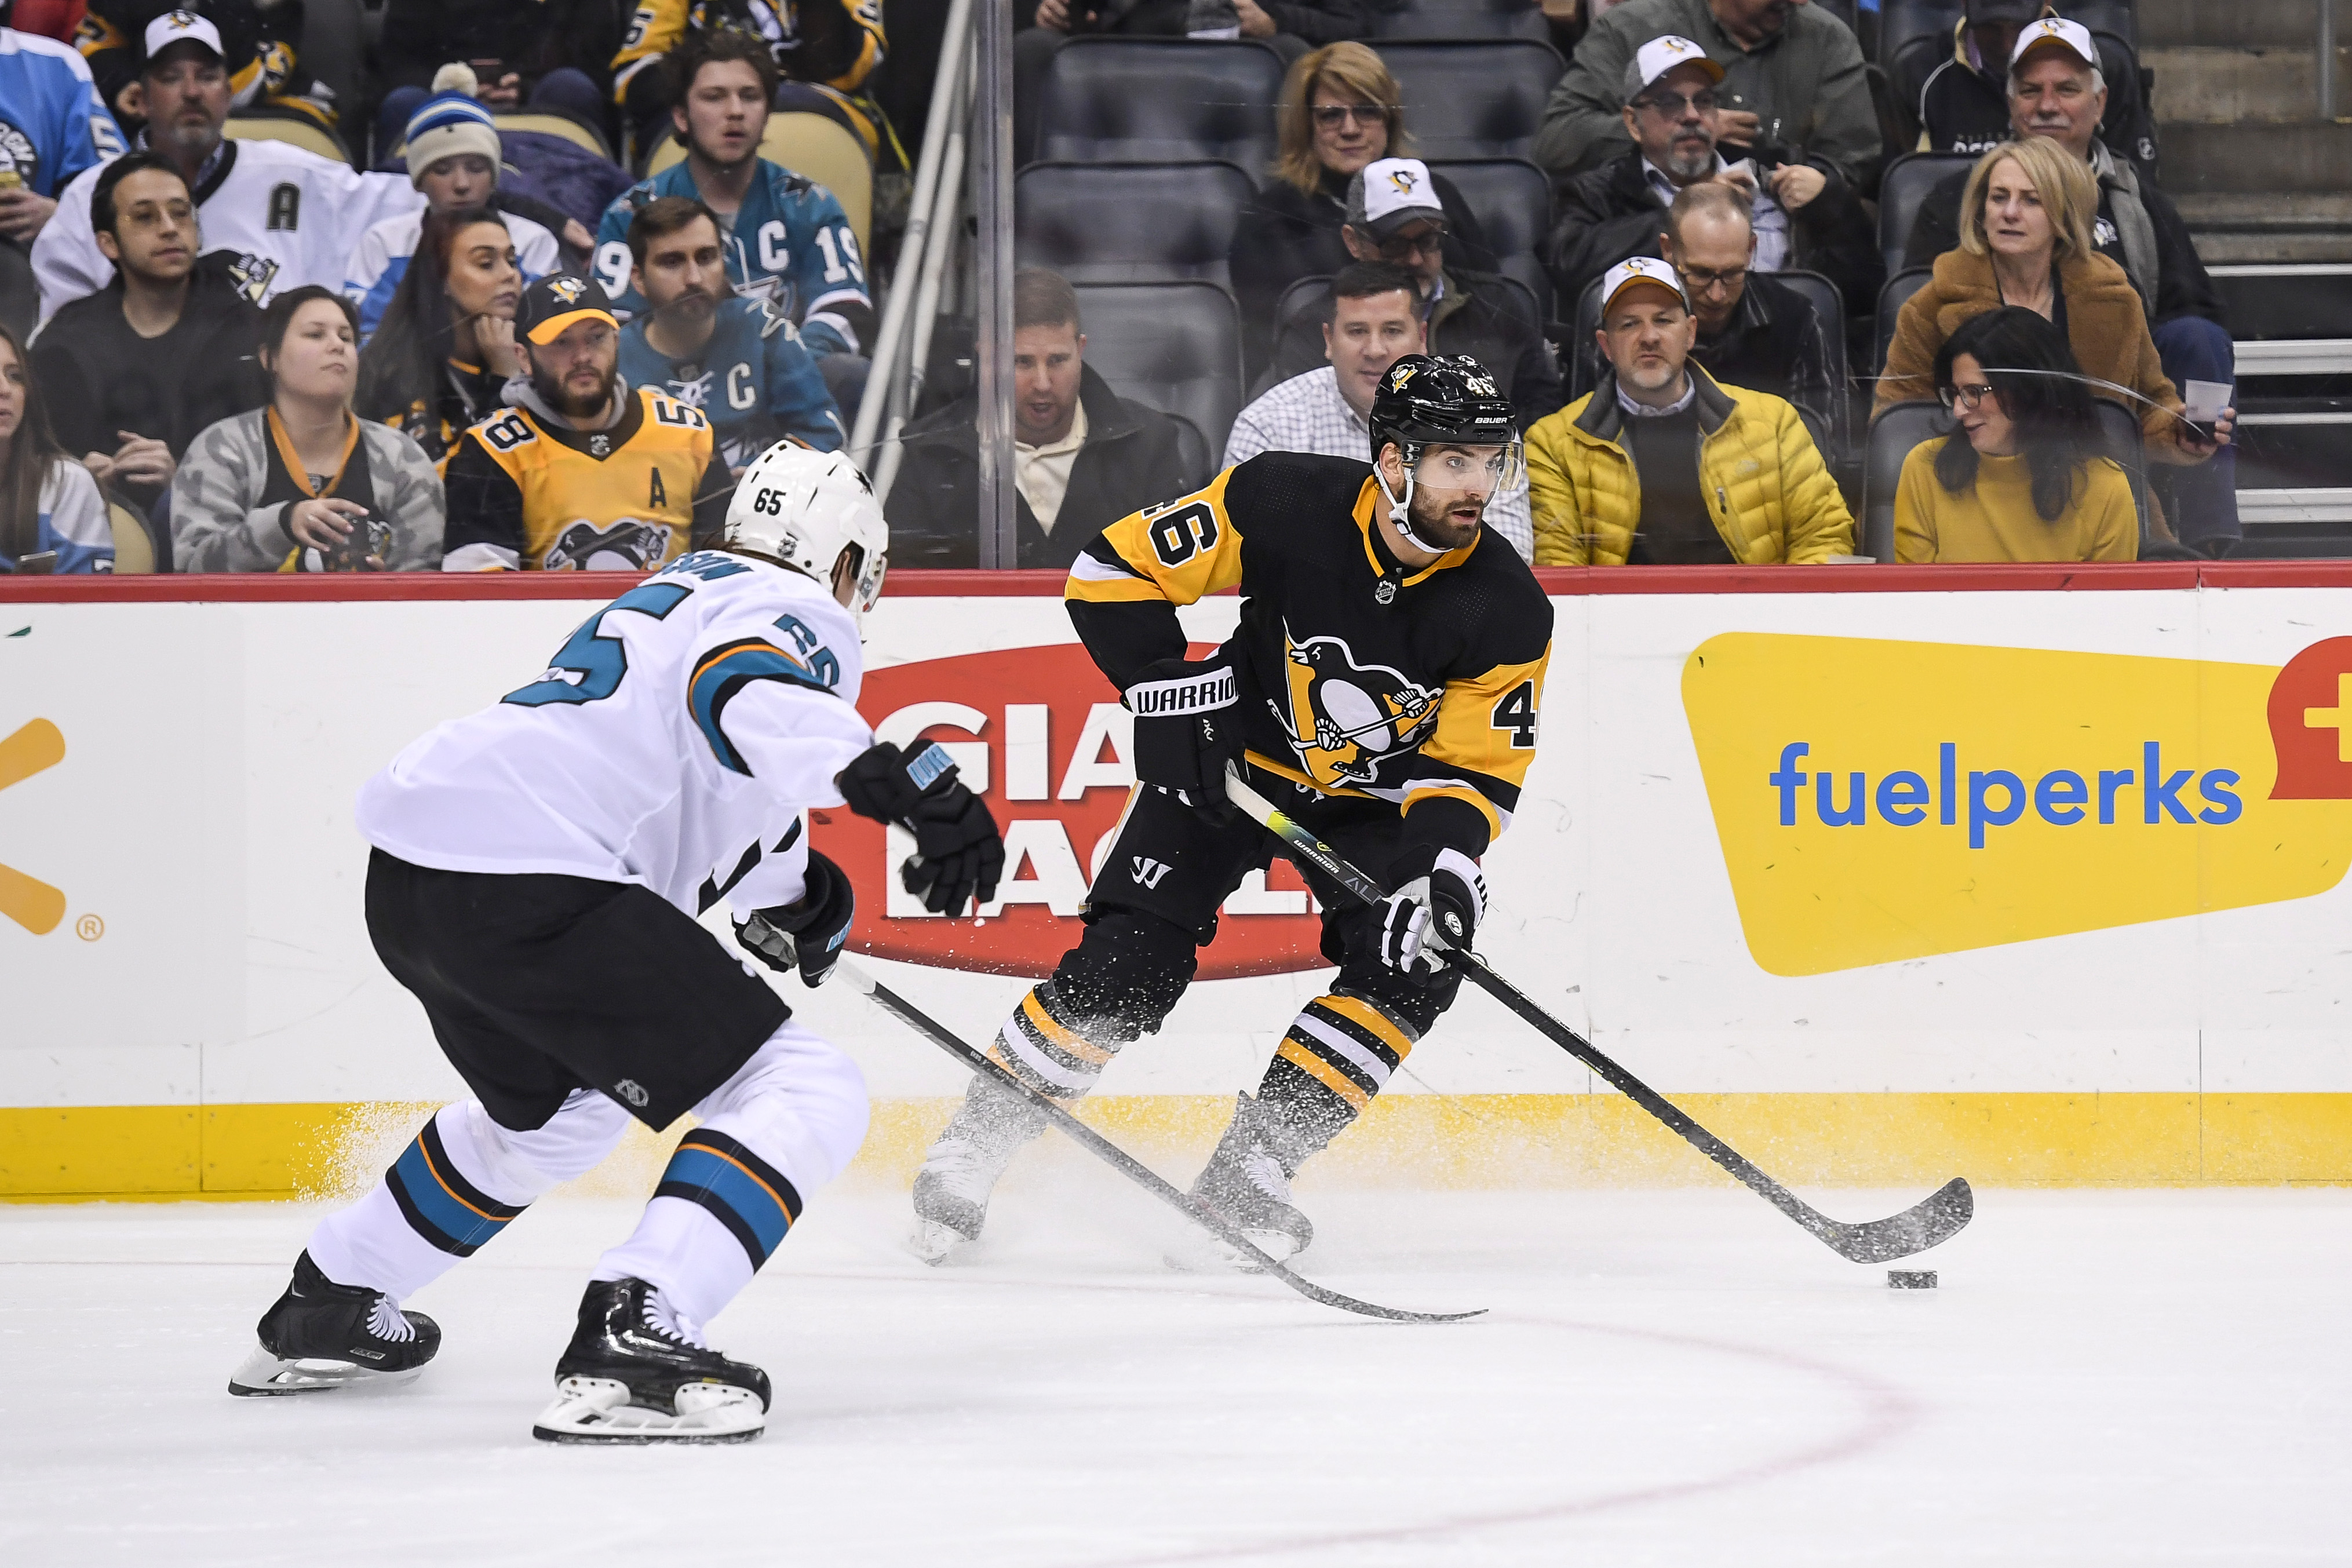 Pittsburgh Penguins Left Wing Zach Aston-Reese (46) skates with the puck while San Jose Sharks Defenseman Erik Karlsson (65) defends during the second period in the NHL game between the Pittsburgh Penguins and the San Jose Sharks on January 2, 2020, at PPG Paints Arena in Pittsburgh, PA.